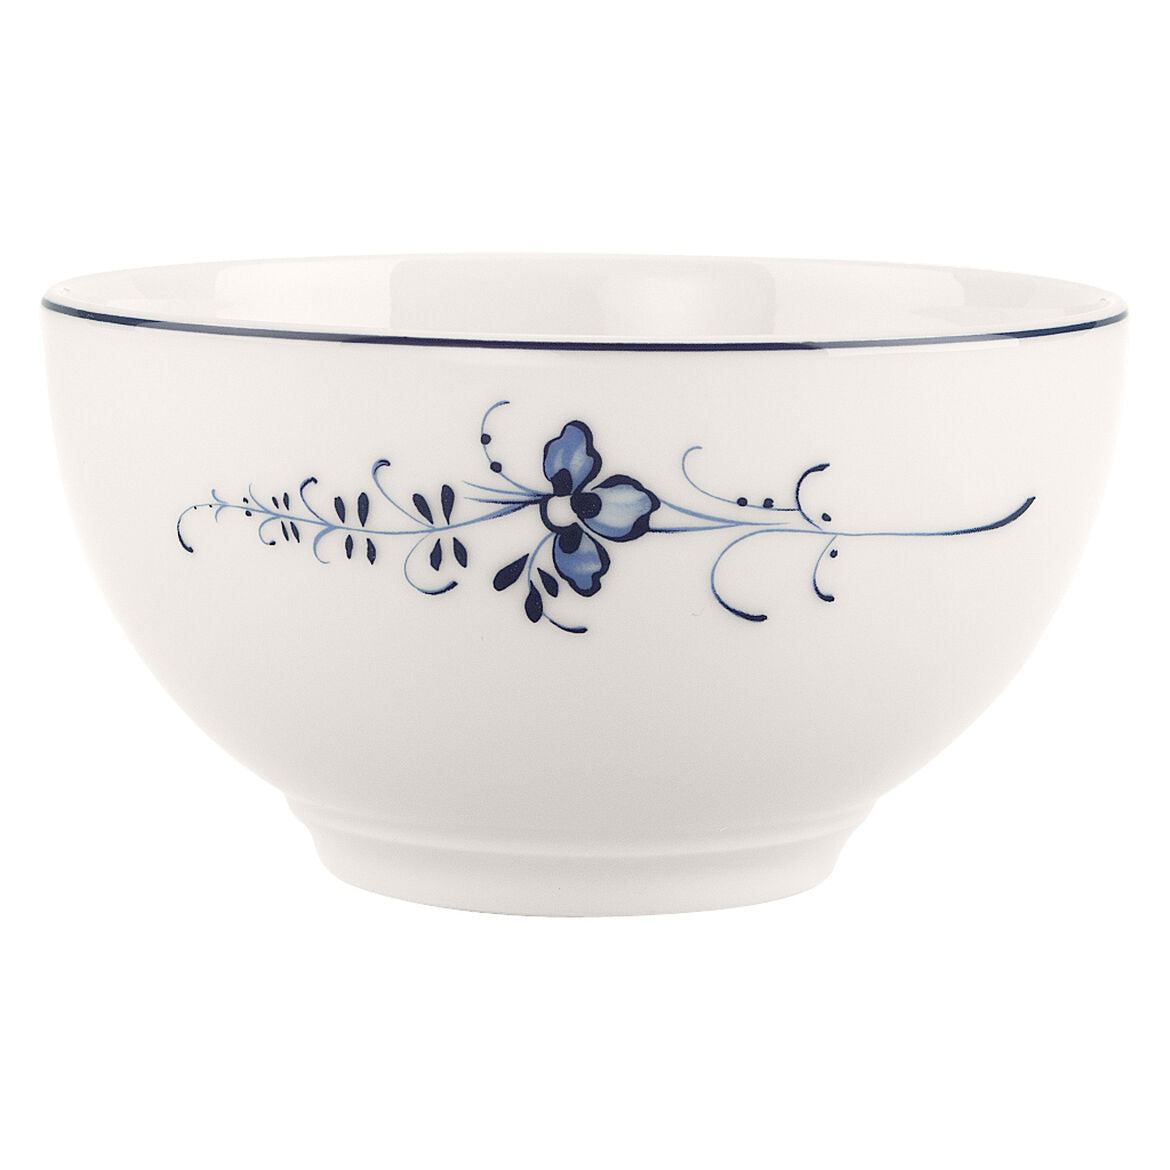 Villeroy & Boch Vieux Luxembourg Rice Bowl, 21.75oz